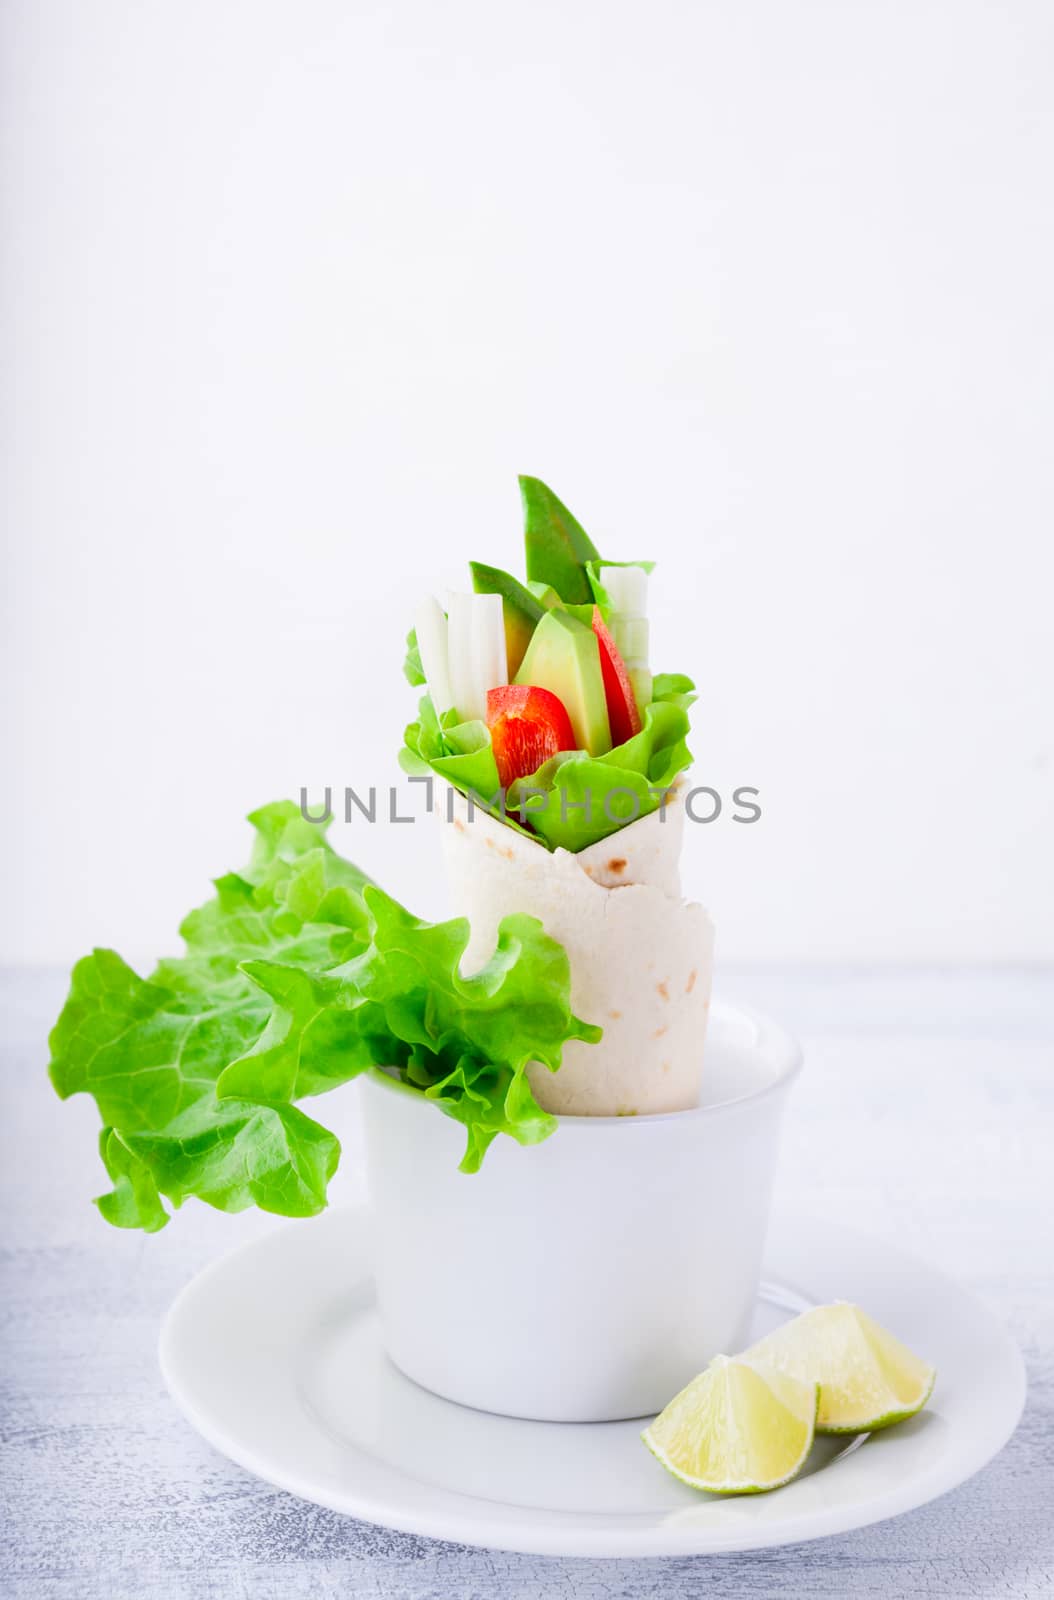 Vegetable wrap sandwiches with greenery on a white plate